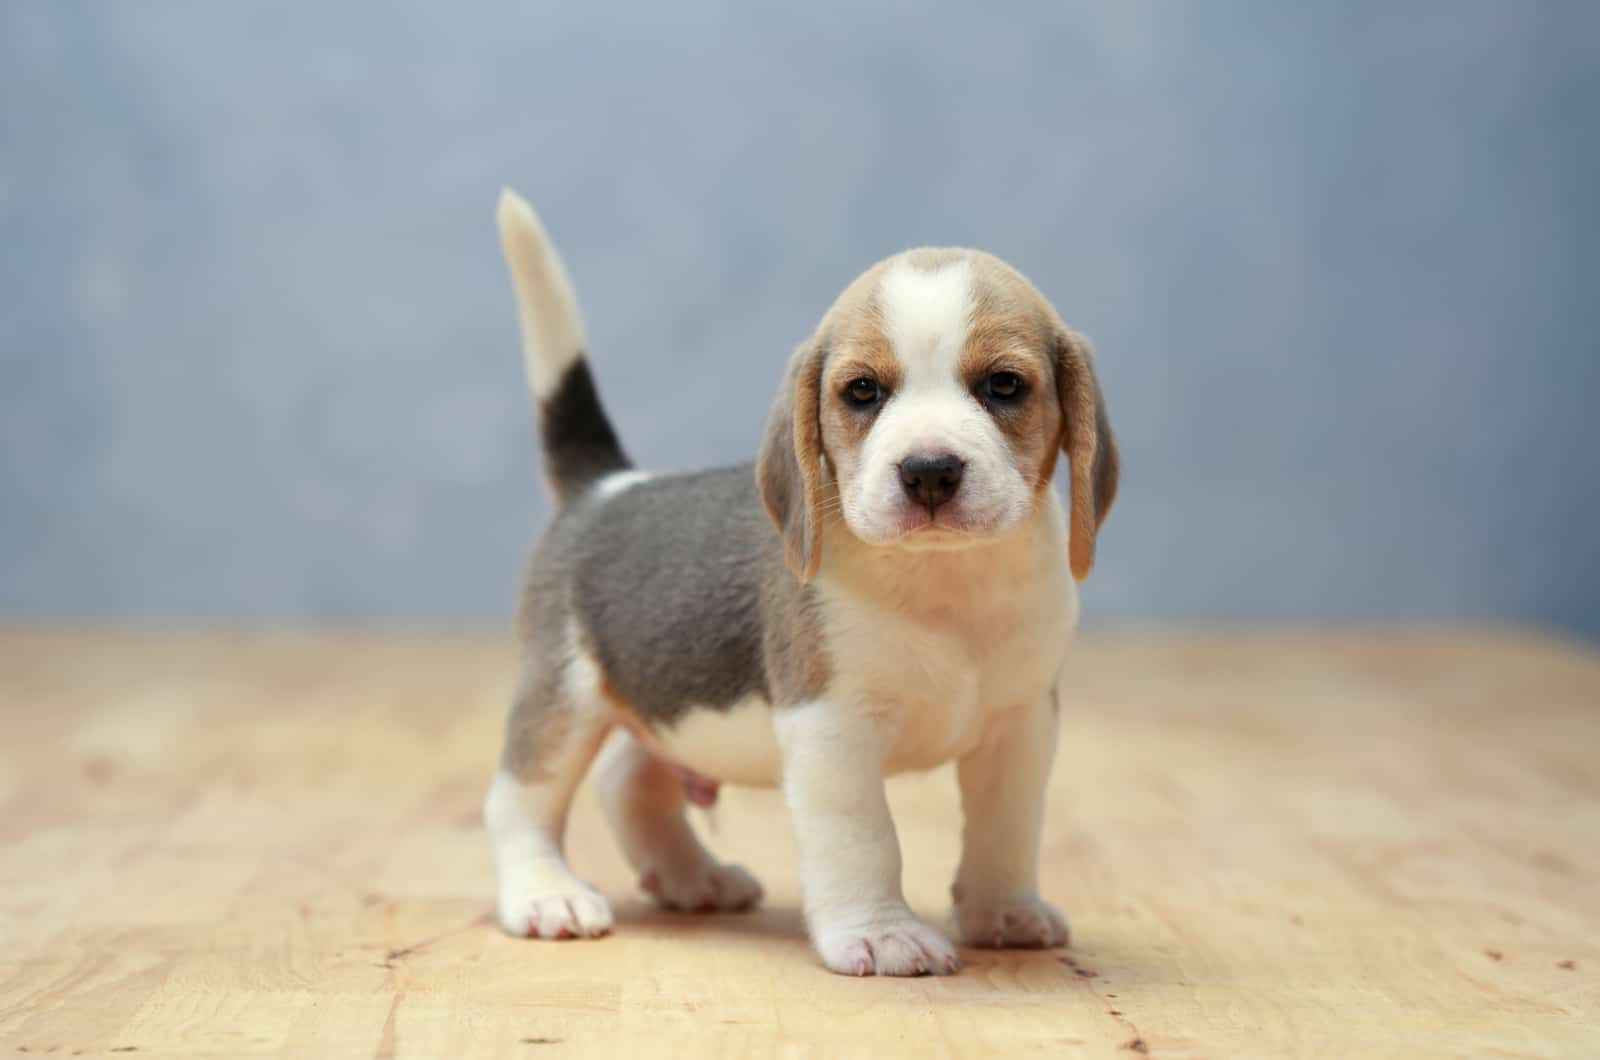 Beagle Puppy stands and looks at the camera